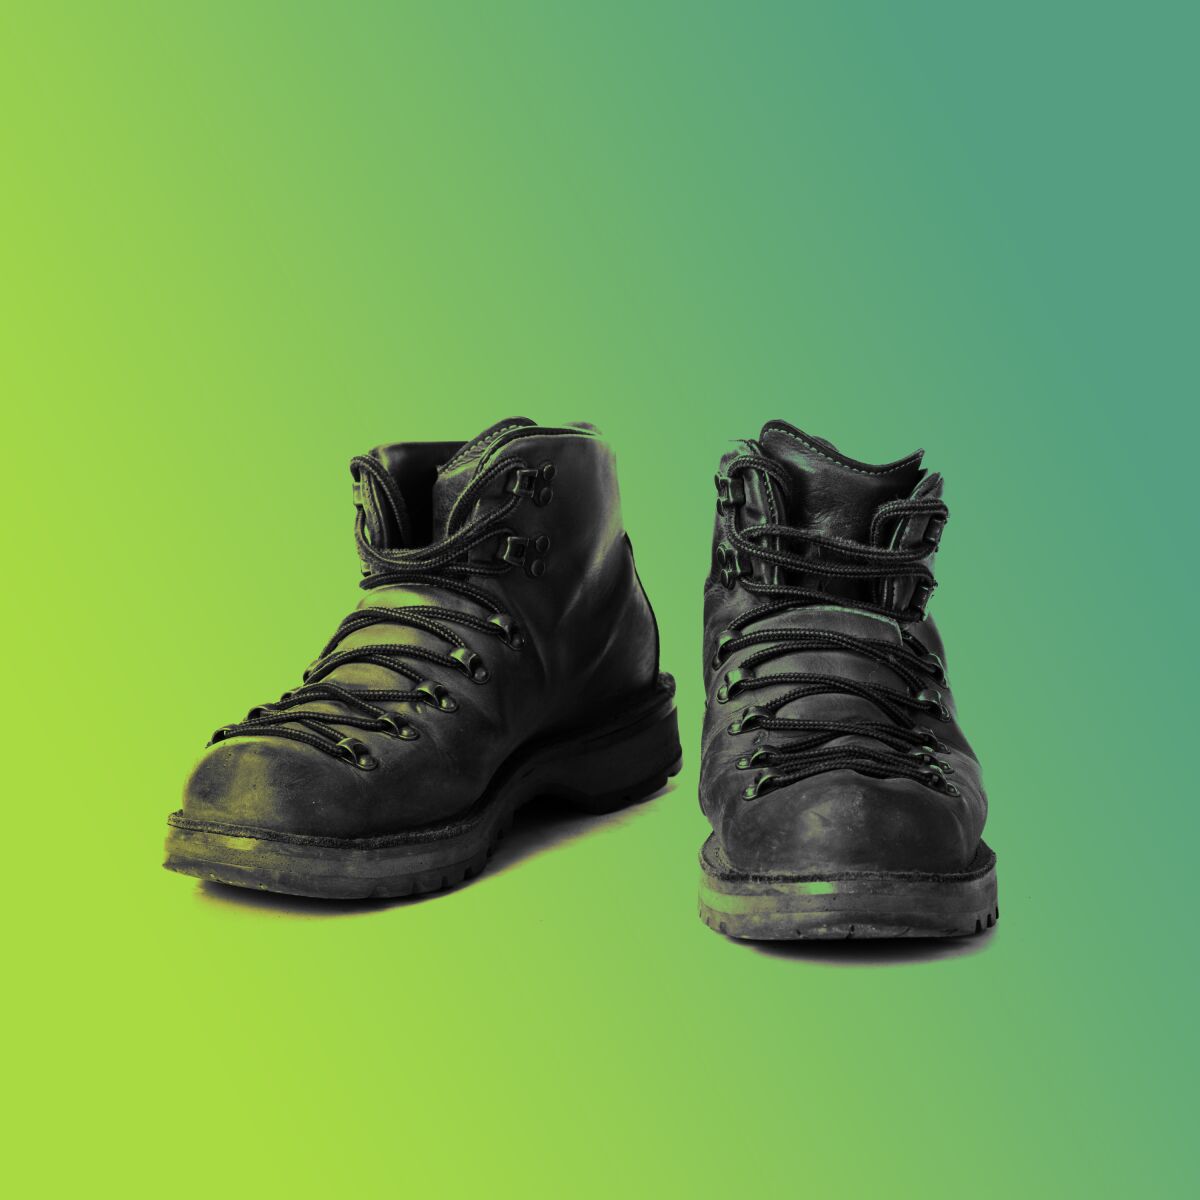 An illustration of hiking boots.